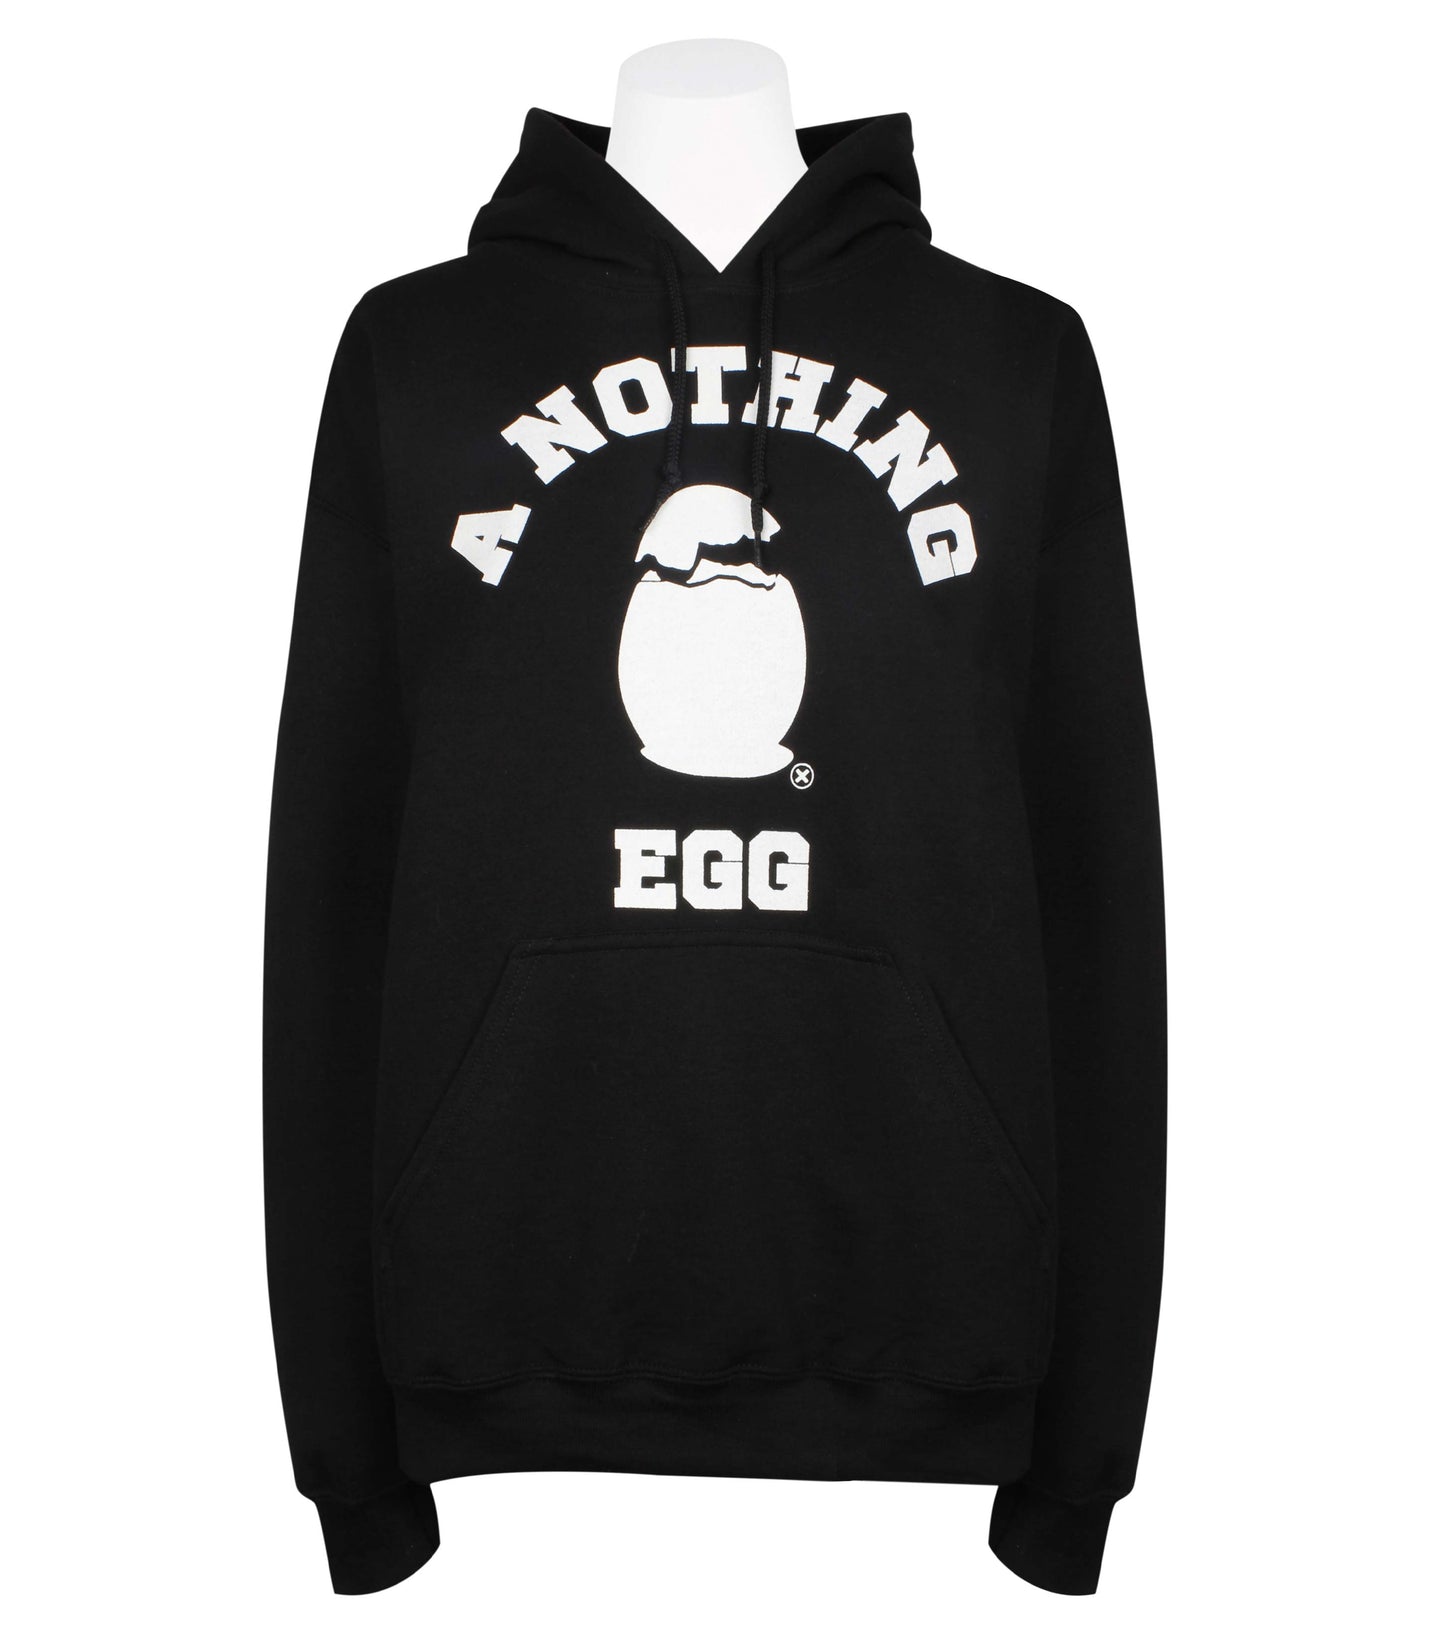 A Nothing Egg Hoodie (Unisex)